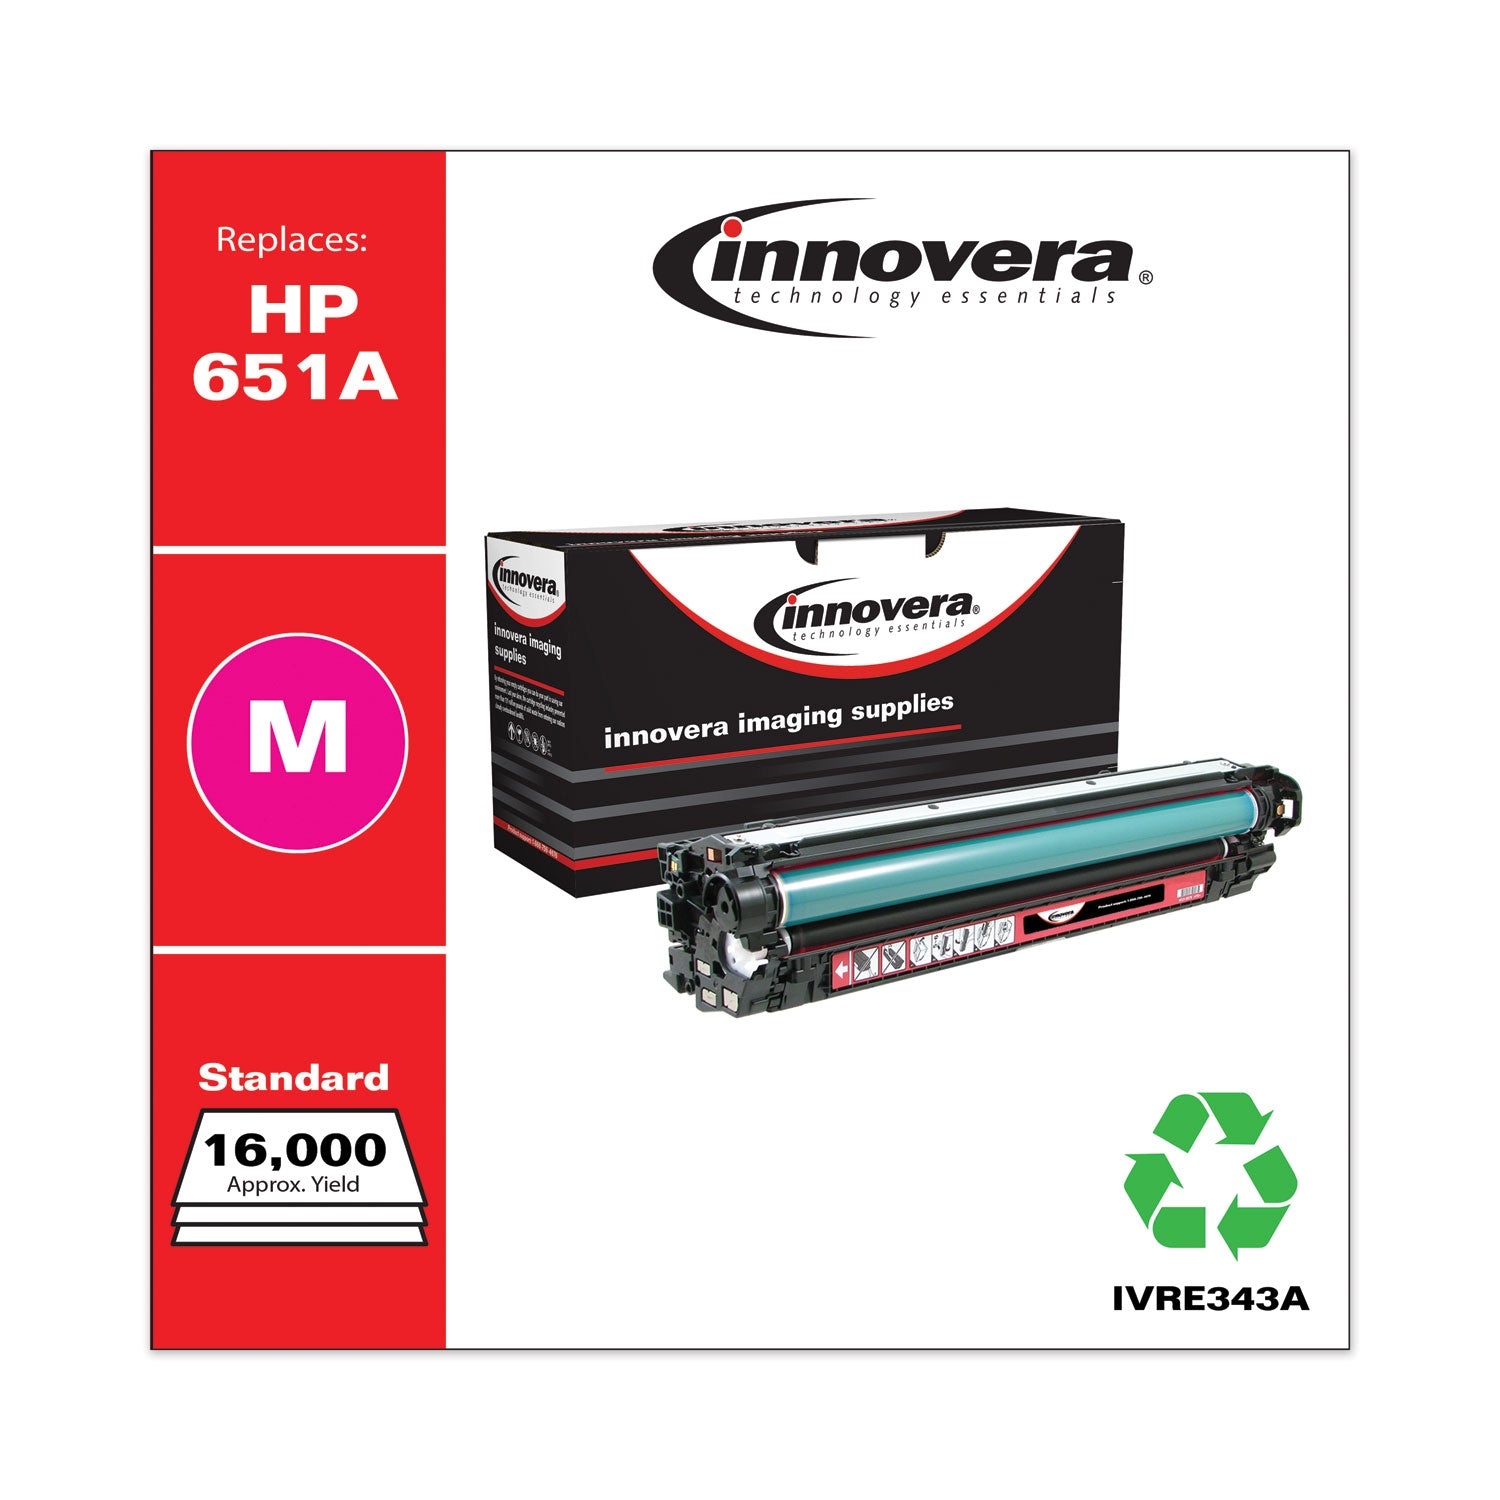 remanufactured-magenta-toner-replacement-for-651a-ce343a-13500-page-yield_ivre343a - 2